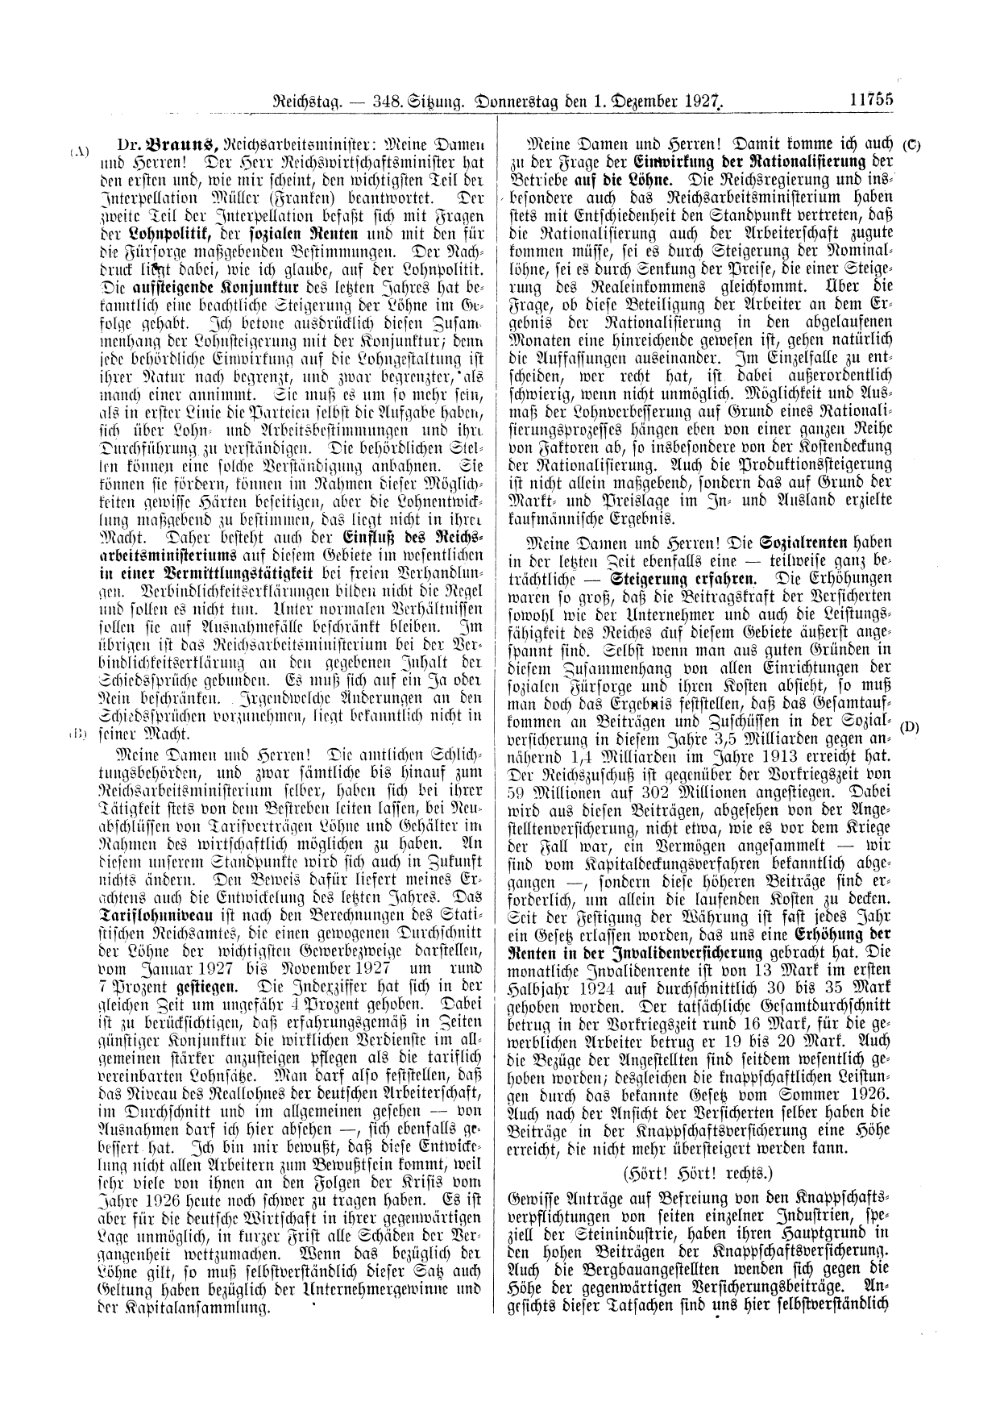 Scan of page 11755